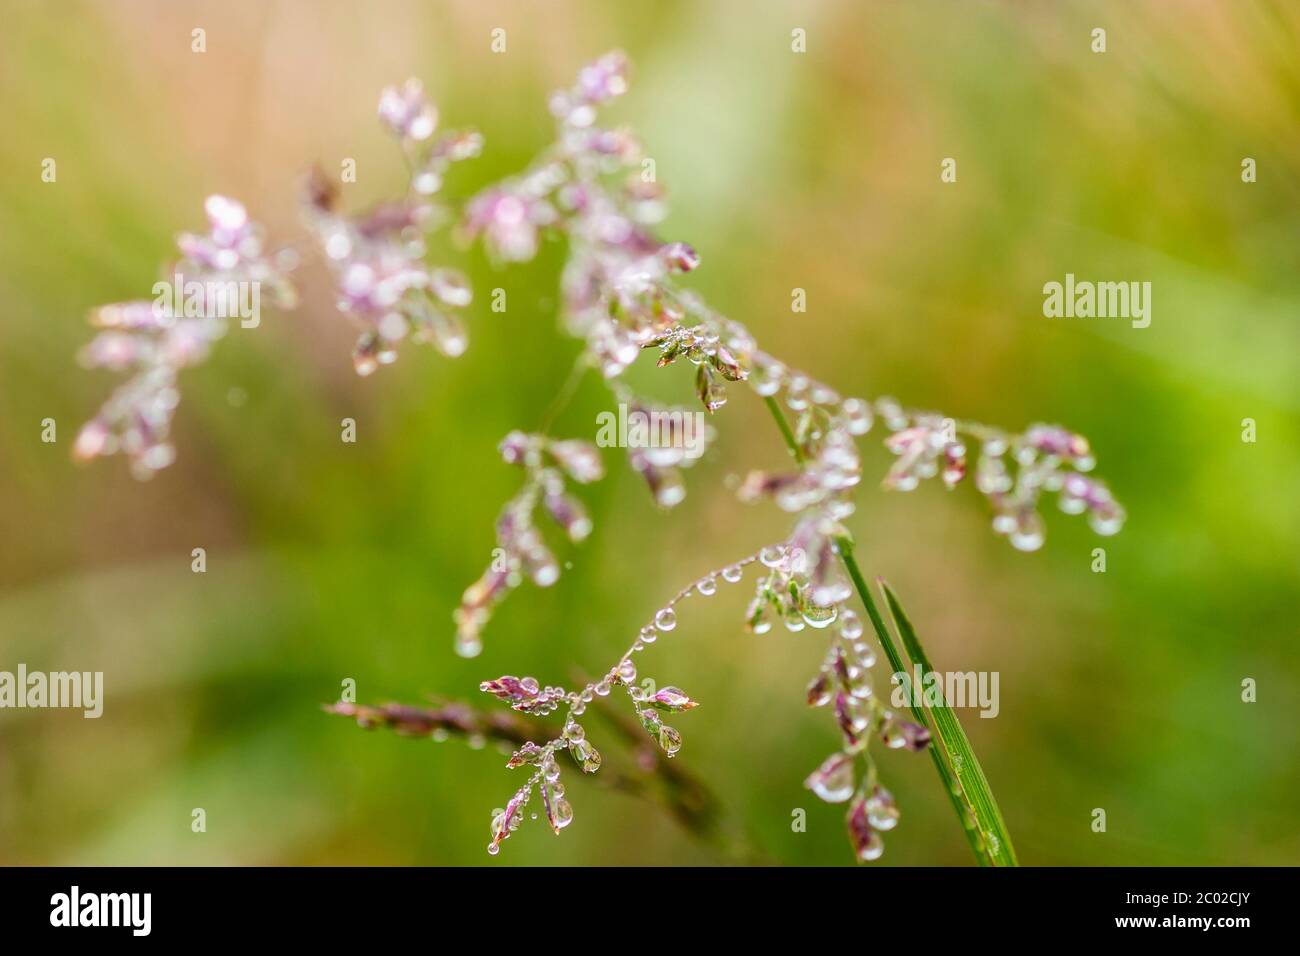 Morning dew drops on a blade of grass Stock Photo